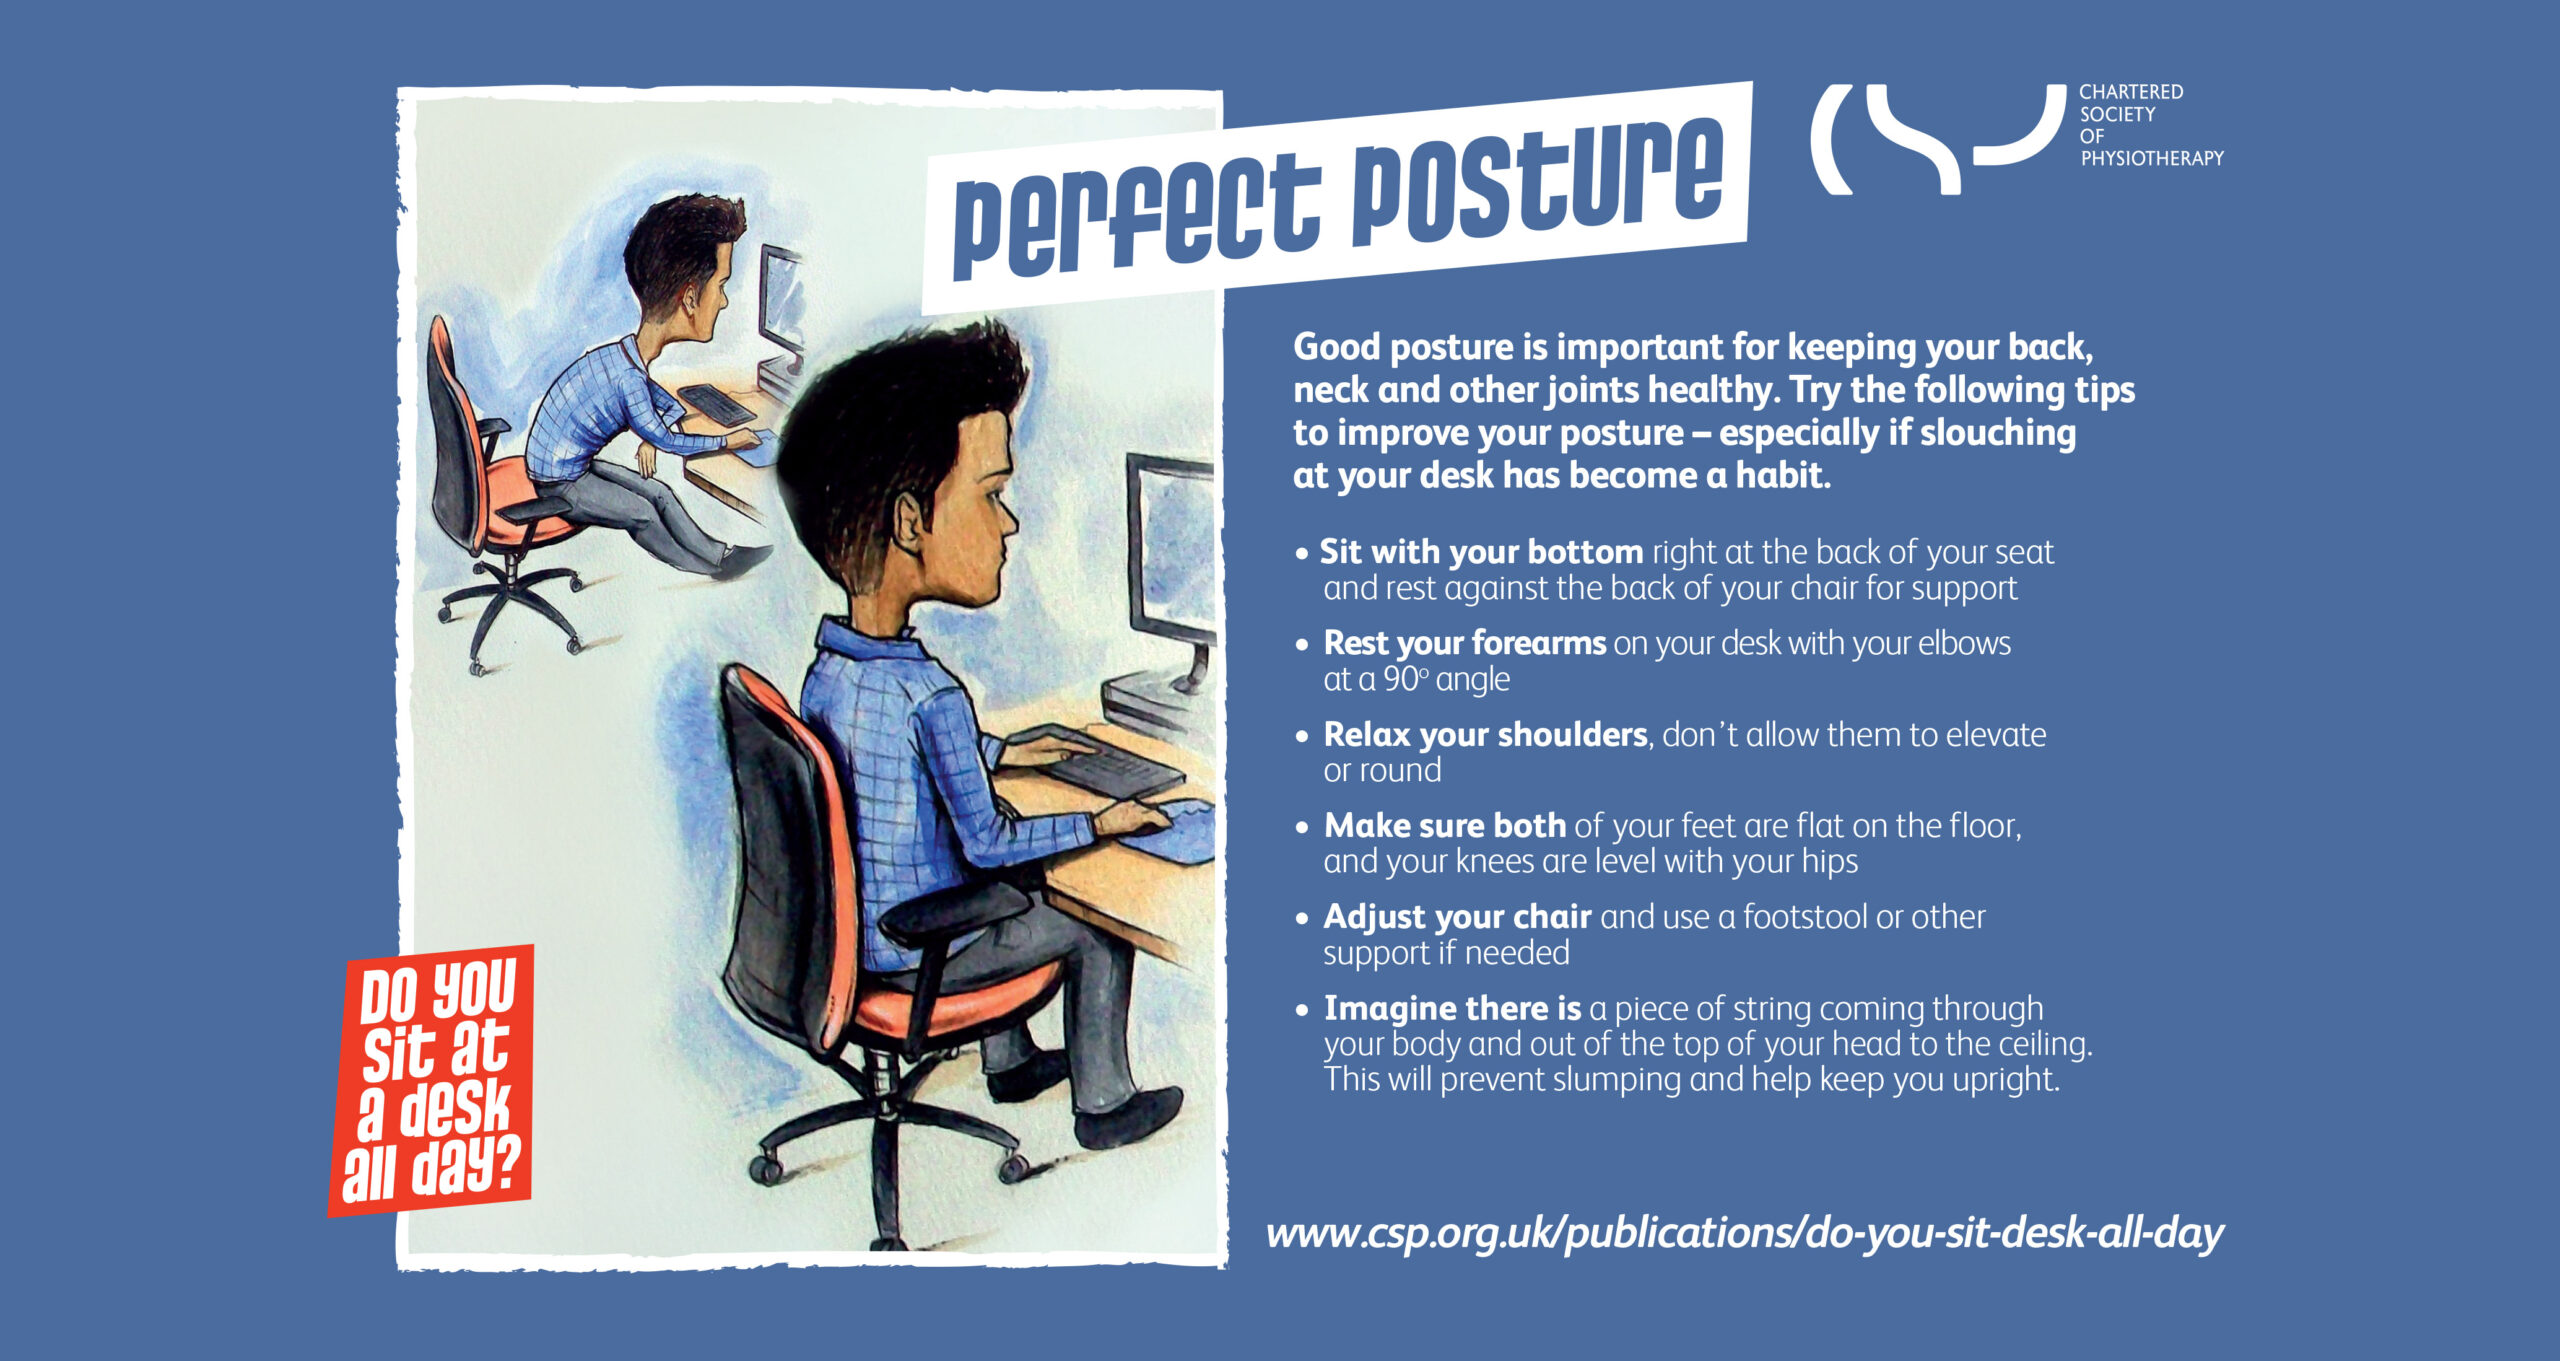 Chartered society of physiotherapy exercise card for perfect posture